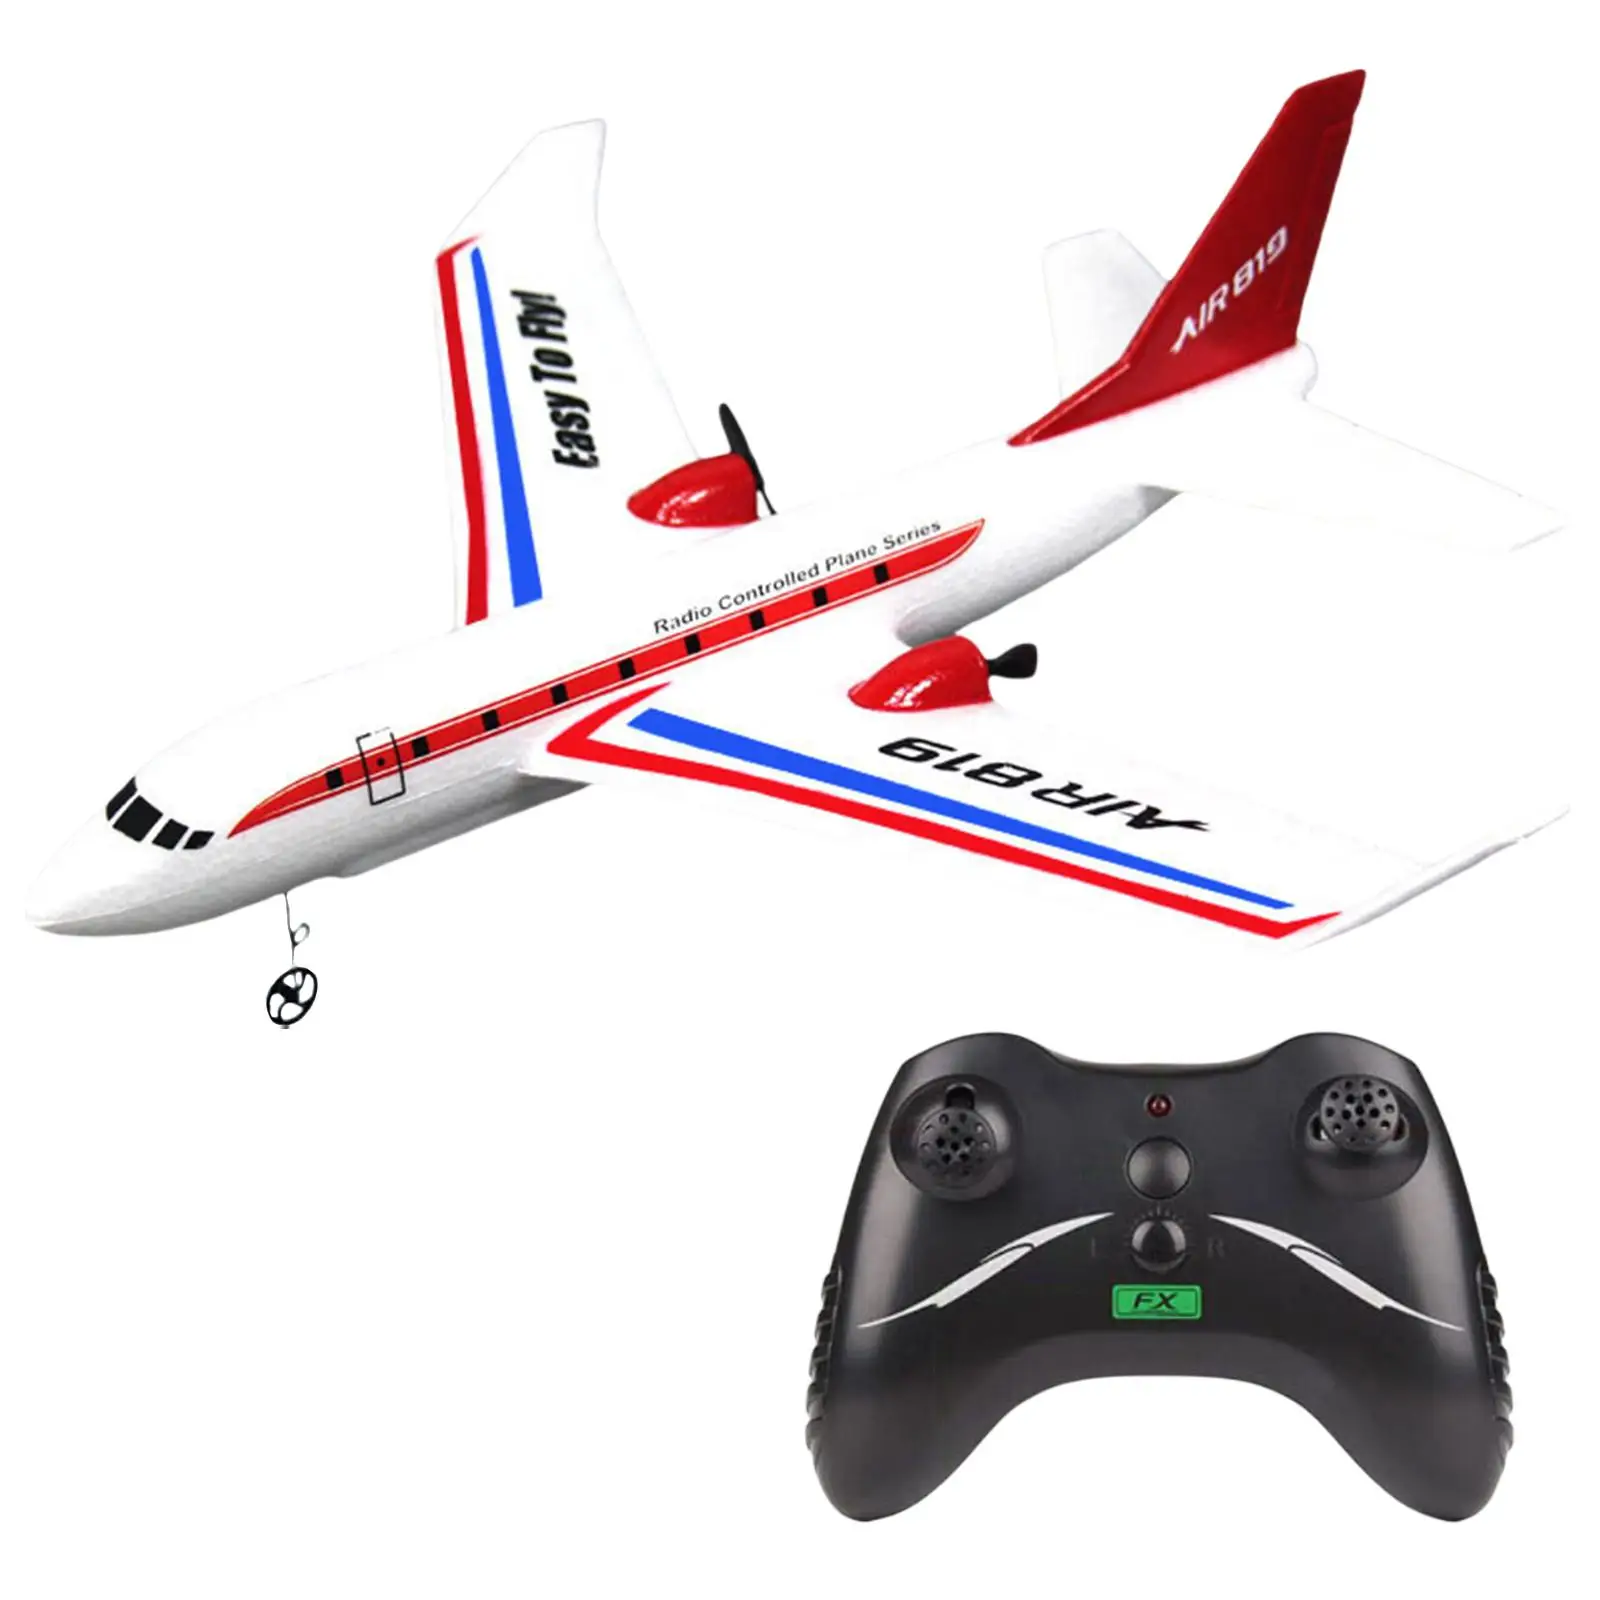 EPP RC Plane Toy Easy to Fly Turn Left for Beginners Adults Kids